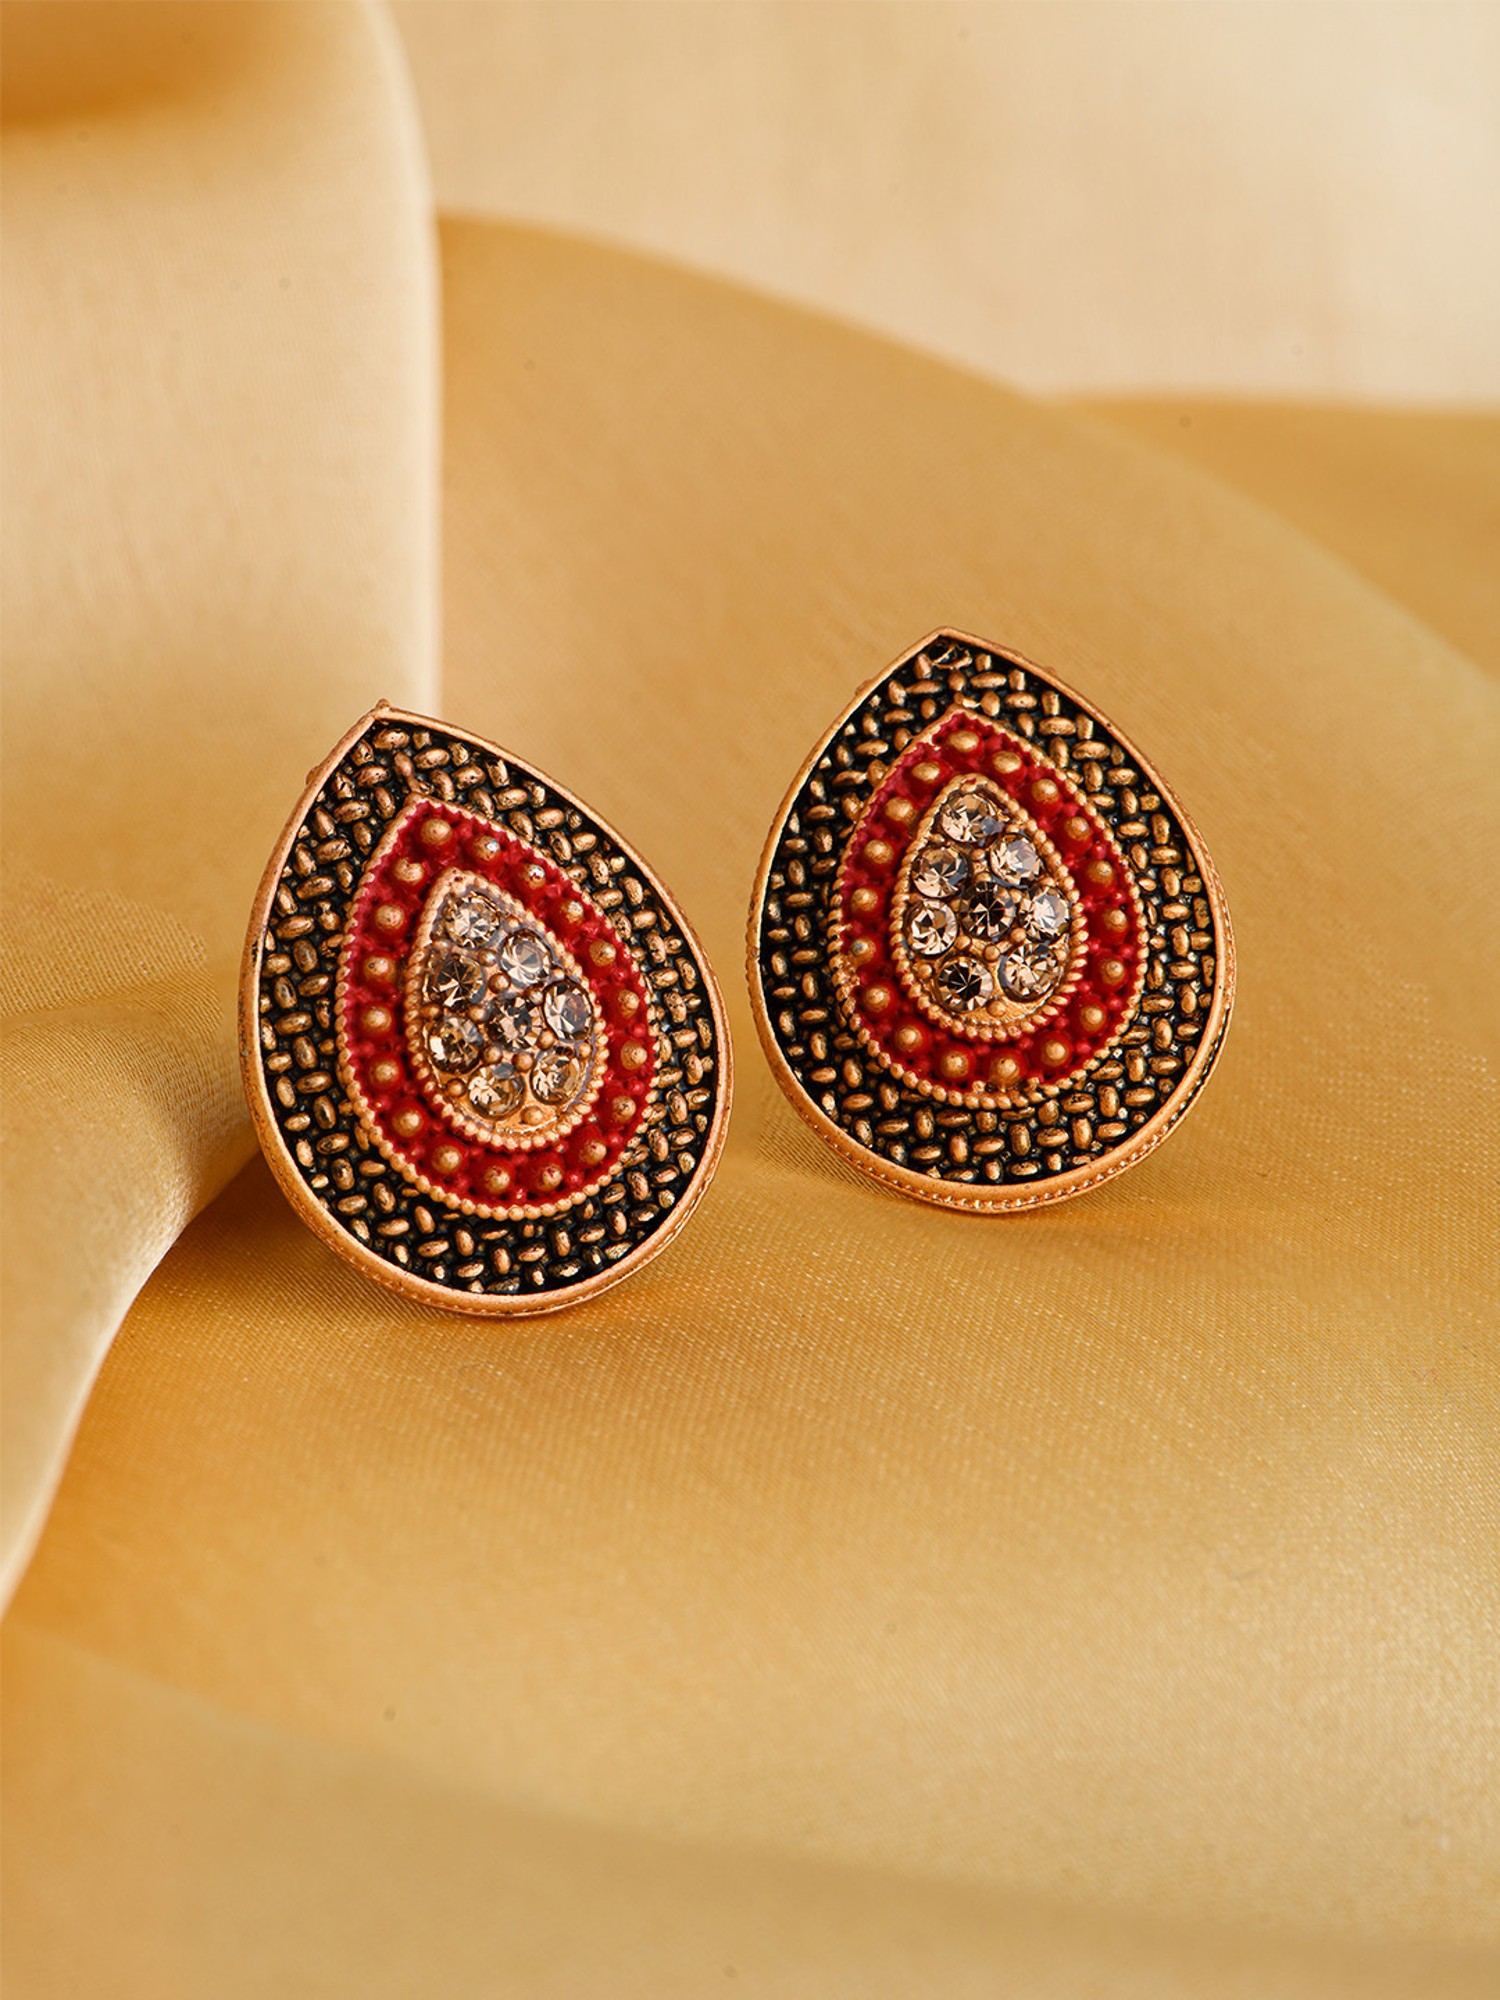 Moedbuille Earrings  Buy Moedbuille Red Black Beads  Mirror Afghan  Tasselled Design Silver Plated Handcrafted Jhumkas Online  Nykaa Fashion